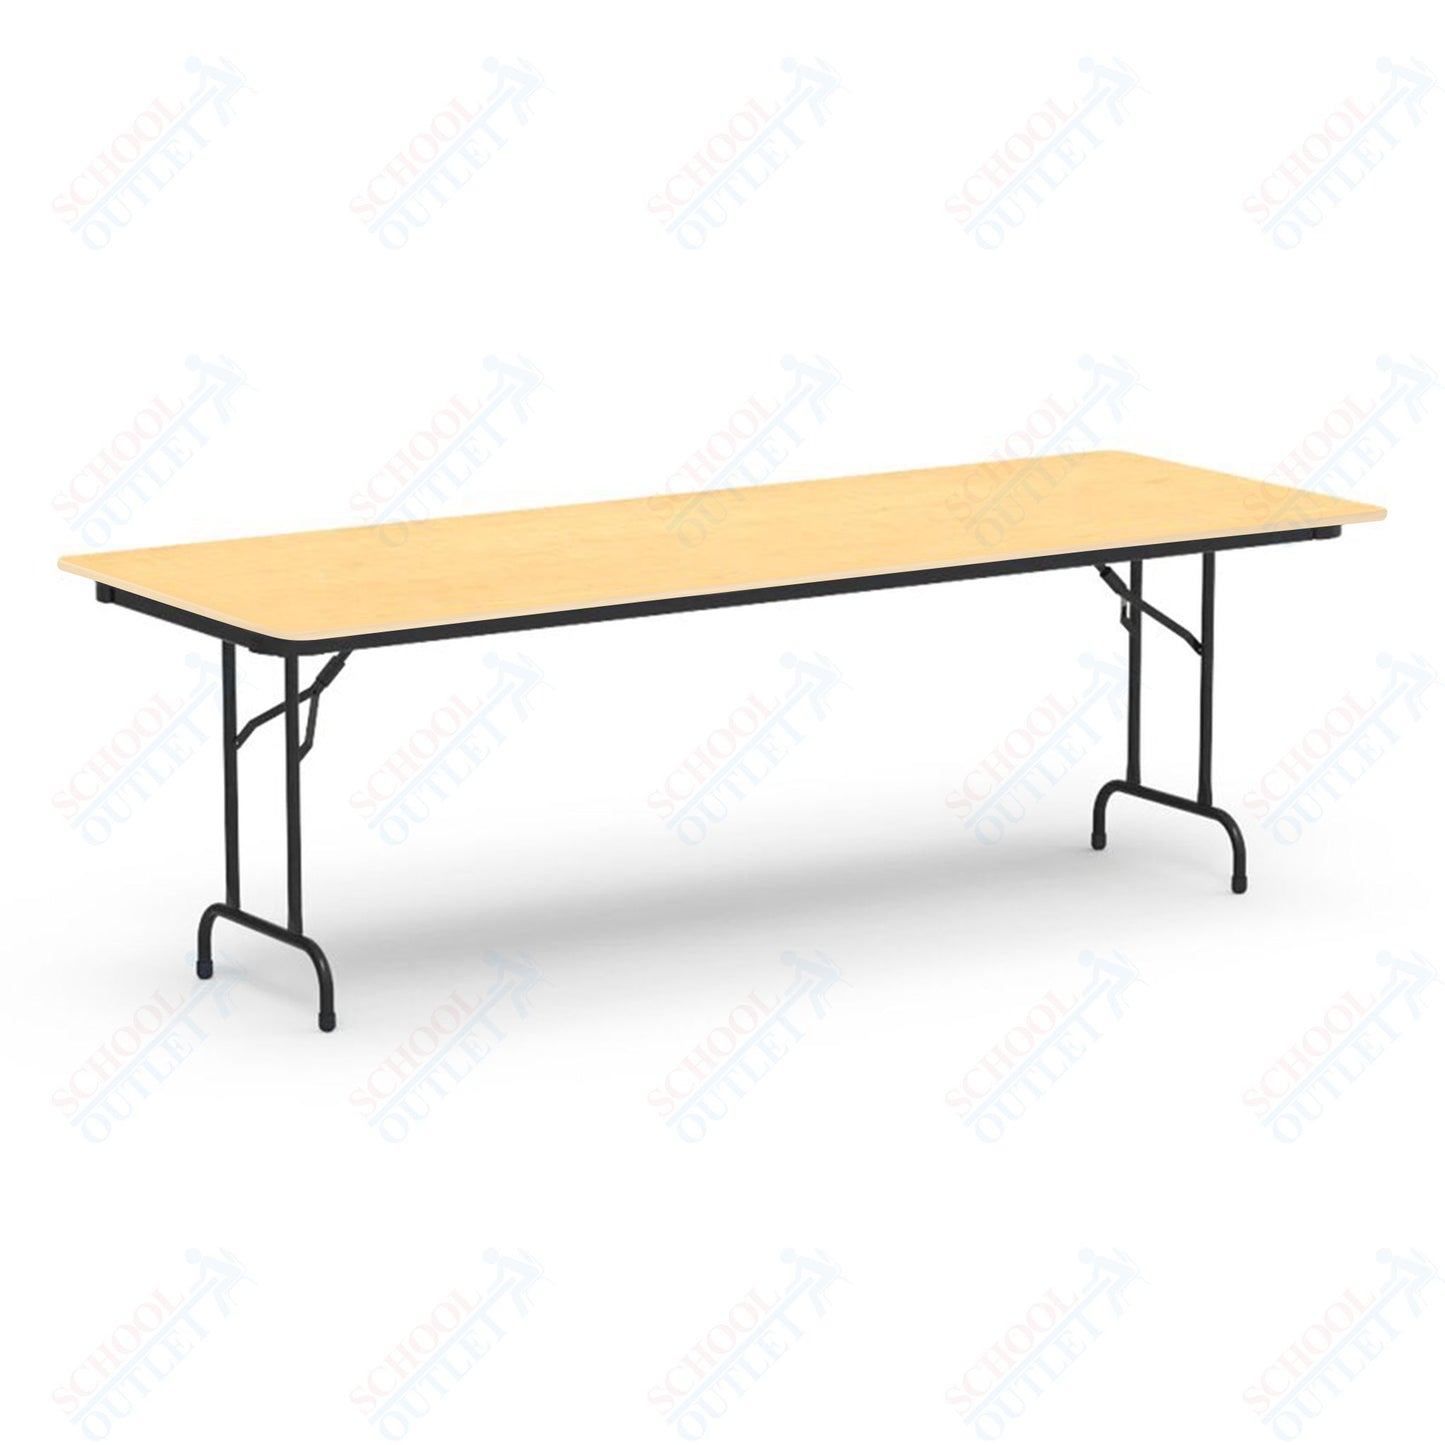 Virco 603096 Sale  - 6000 series 3/4" thick particle board folding table 30" x 96"